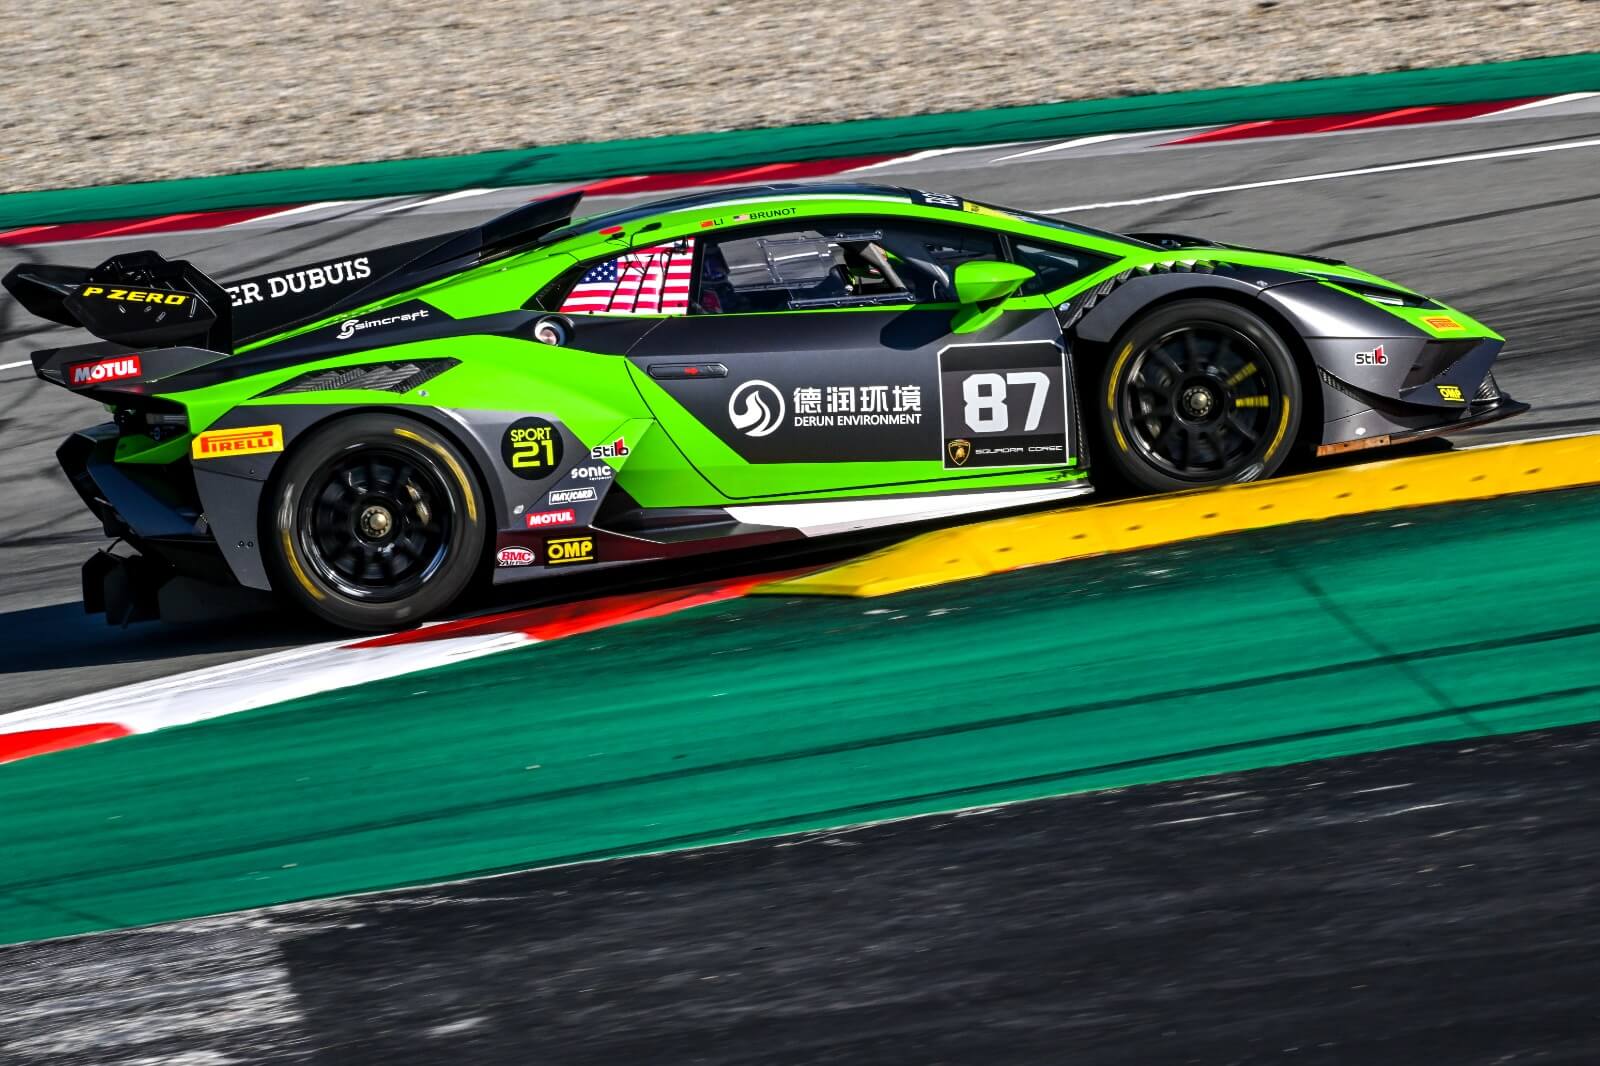 STRONG SUPER TROFEO PACE COMPROMISED FOR LI